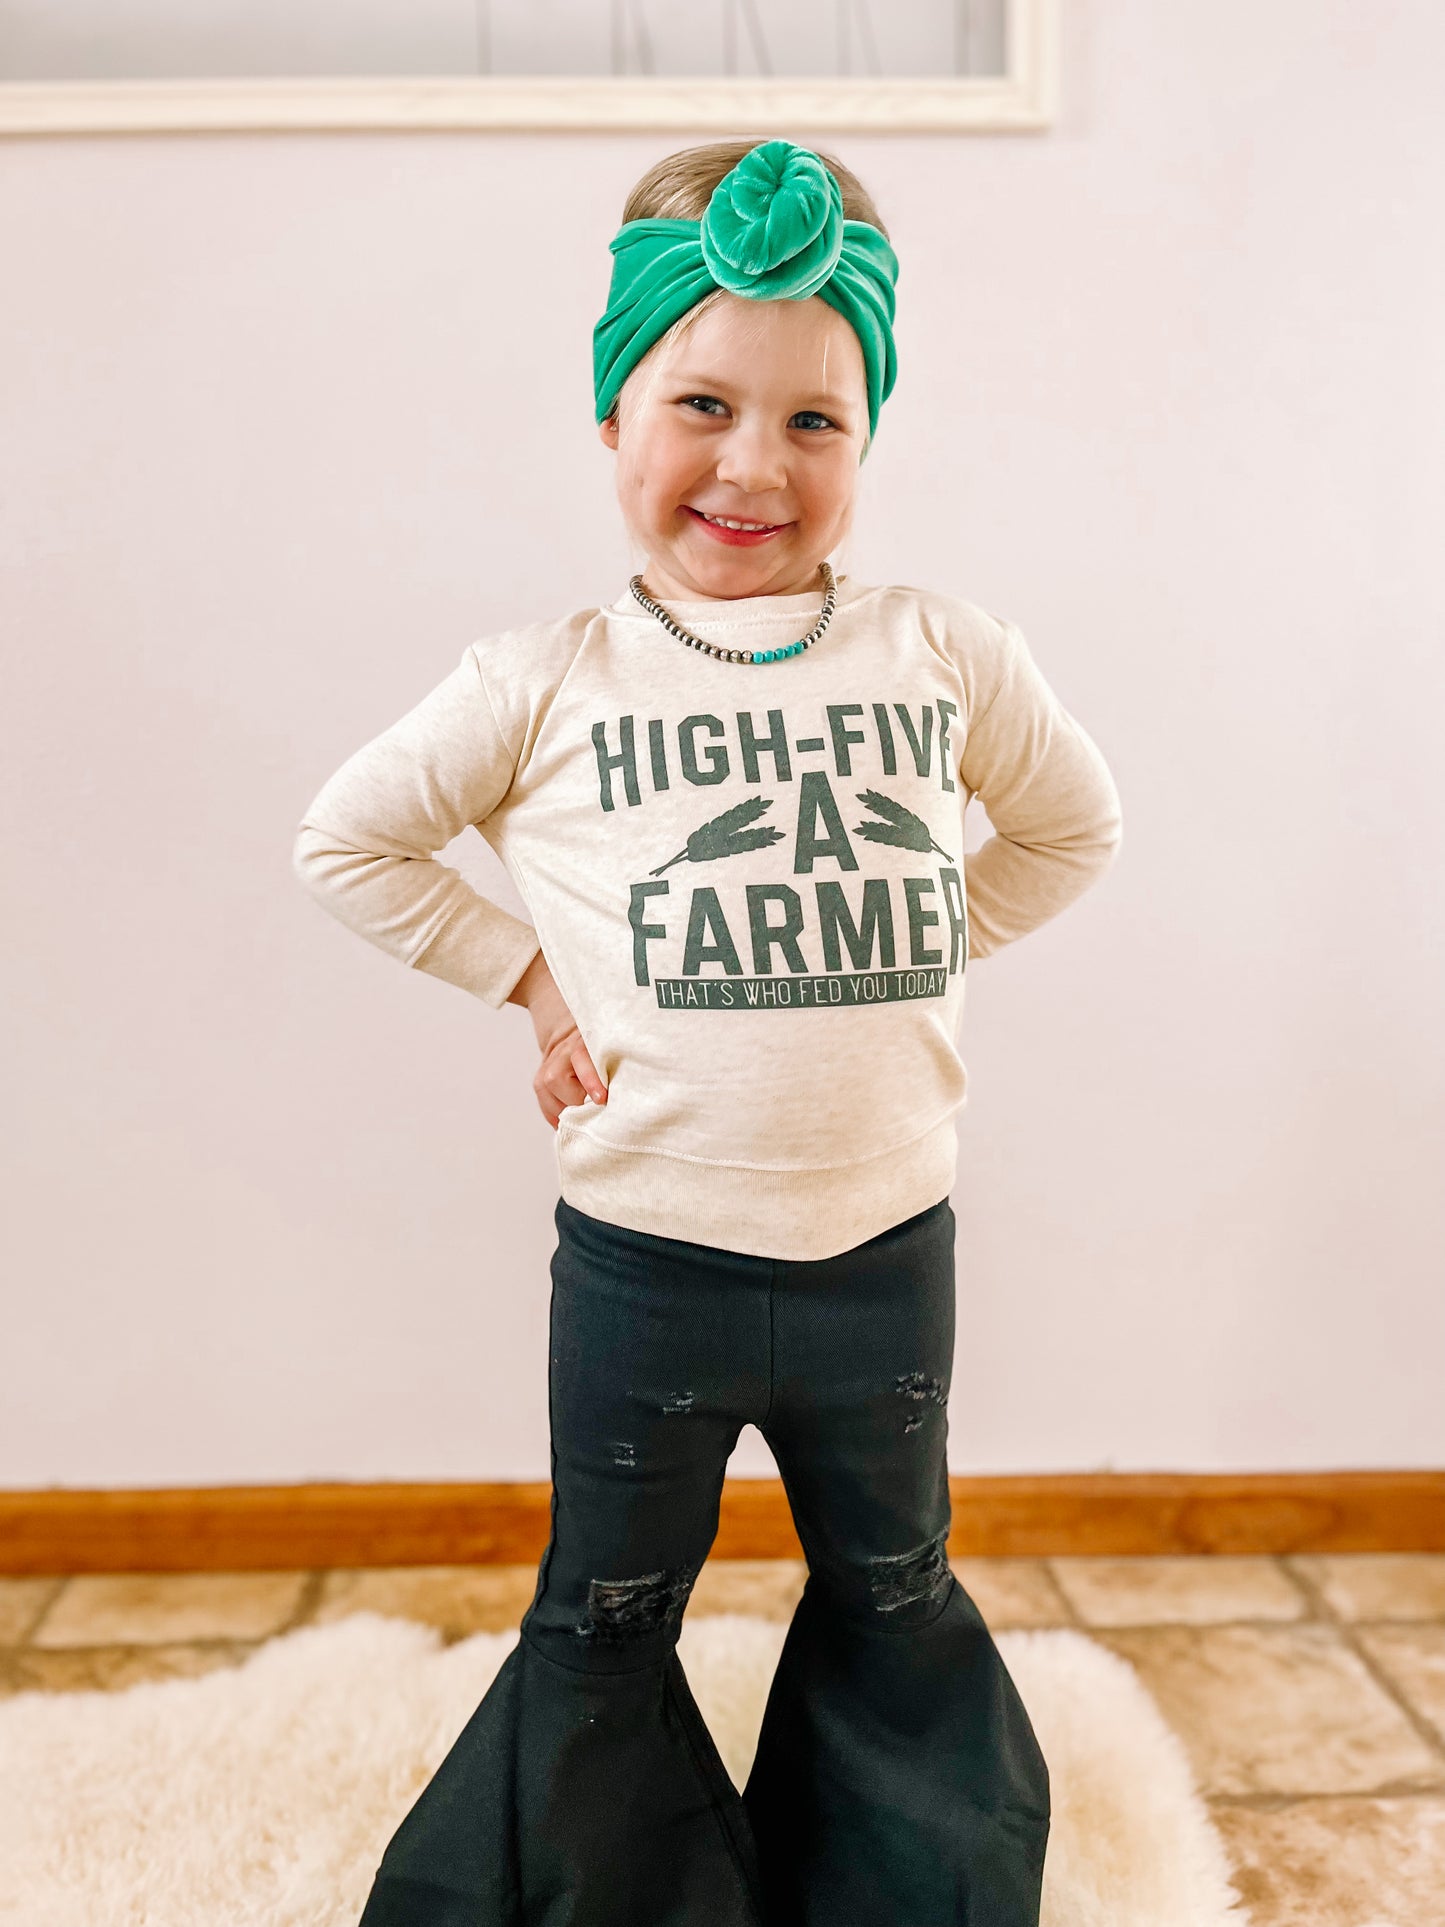 the High Five a |Farmer| That's Who Fed You Today onesie + tee